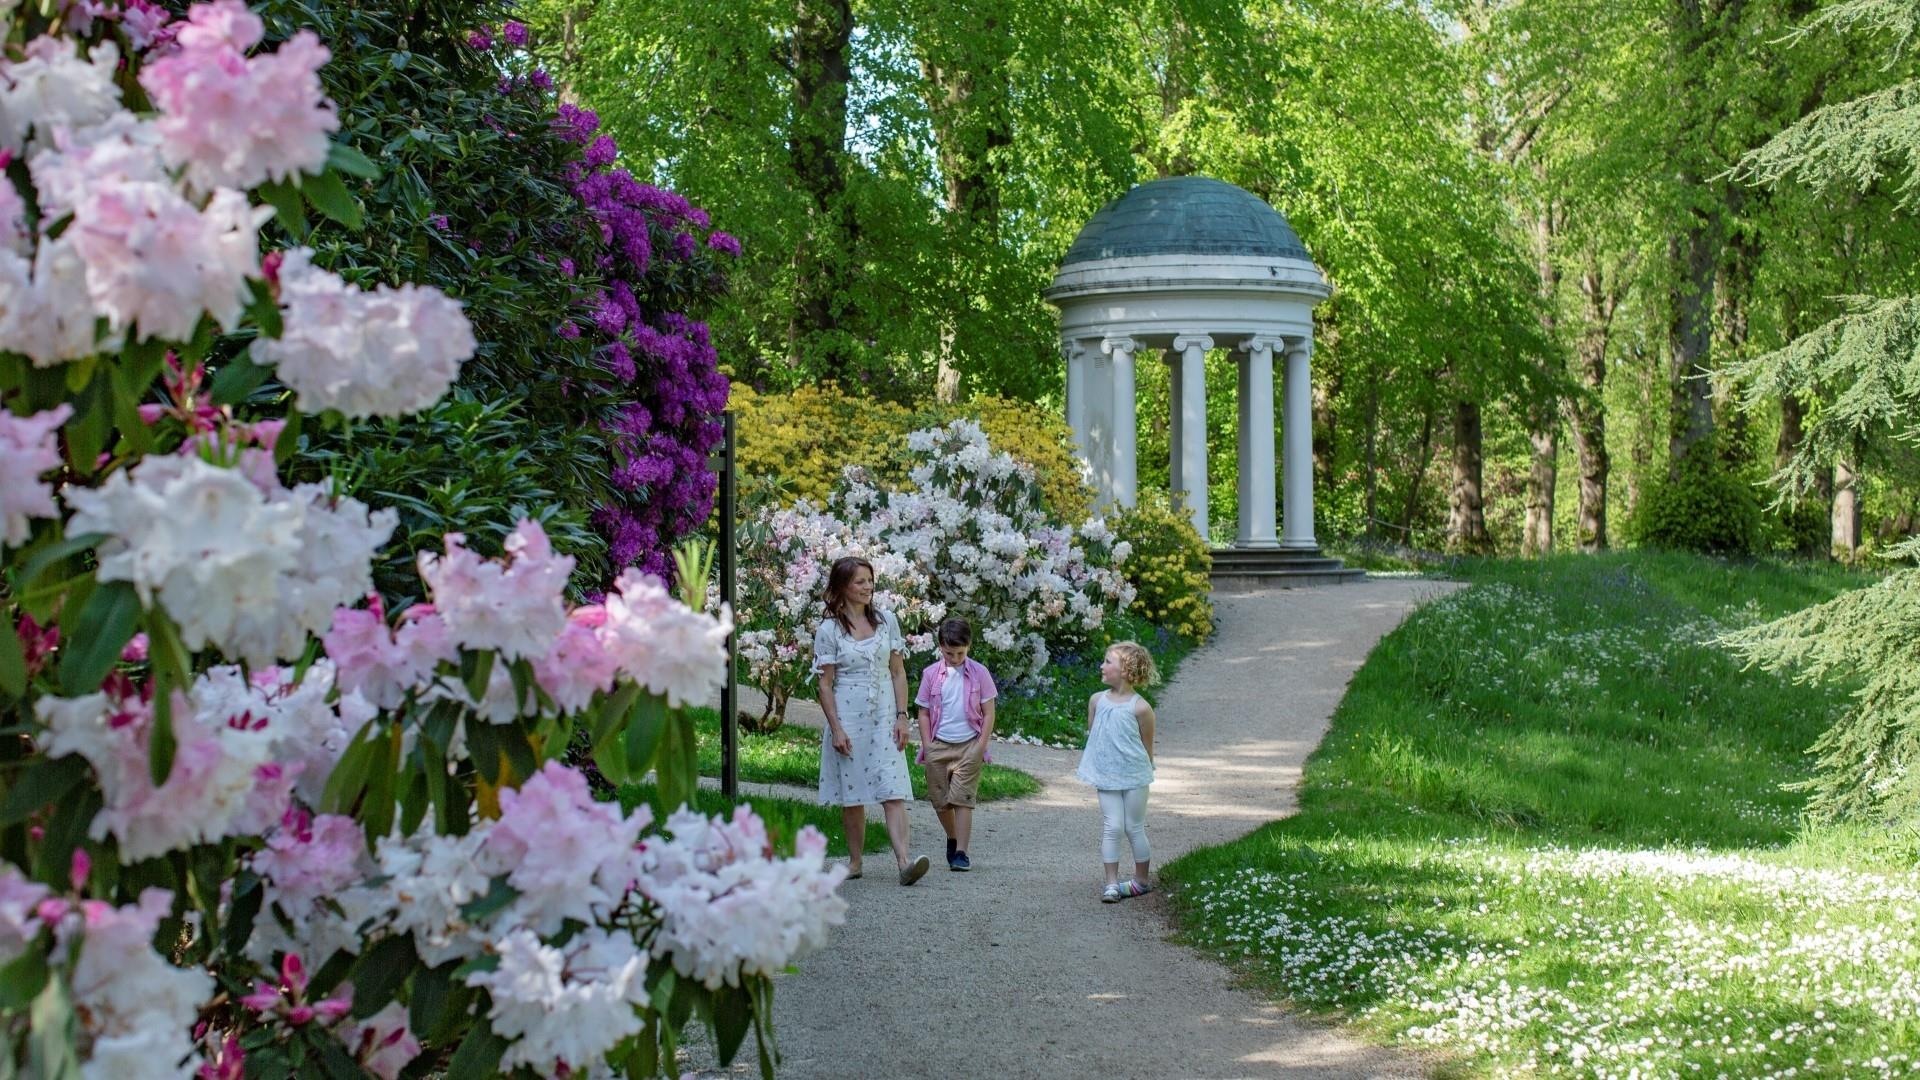 Image shows flowers in bloom at gardens of hillsborough castle with two children and an adult walking along